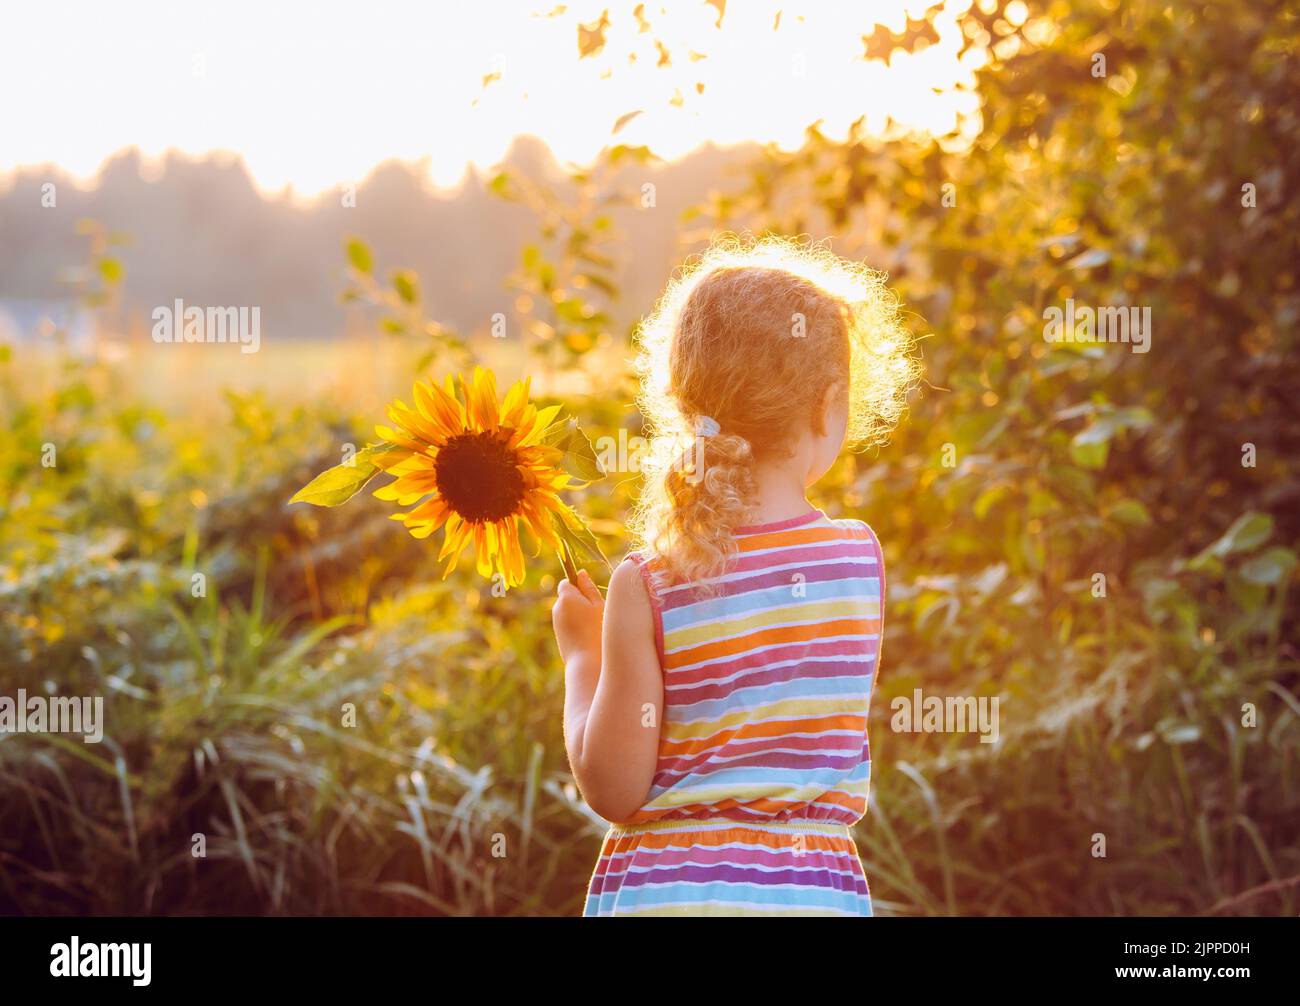 Back view of unrecognizable 6 year old girl child holding a sunflower while sun is setting on golden hour on summer day. Carefree childhood concept. Stock Photo